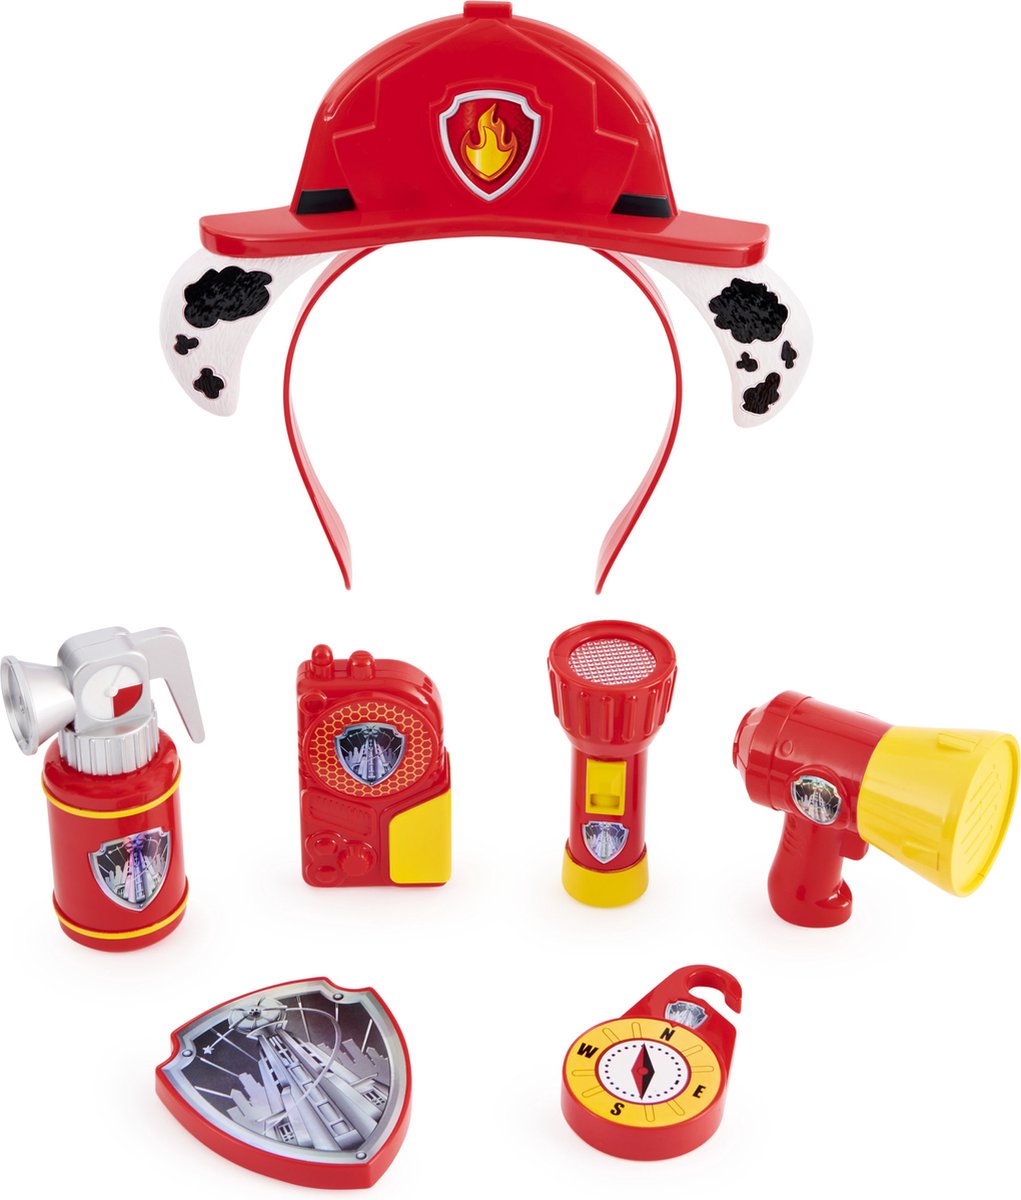 PAW Patrol Marshall Movie Rescue 8-Piece Role Play Set for Pretend Play